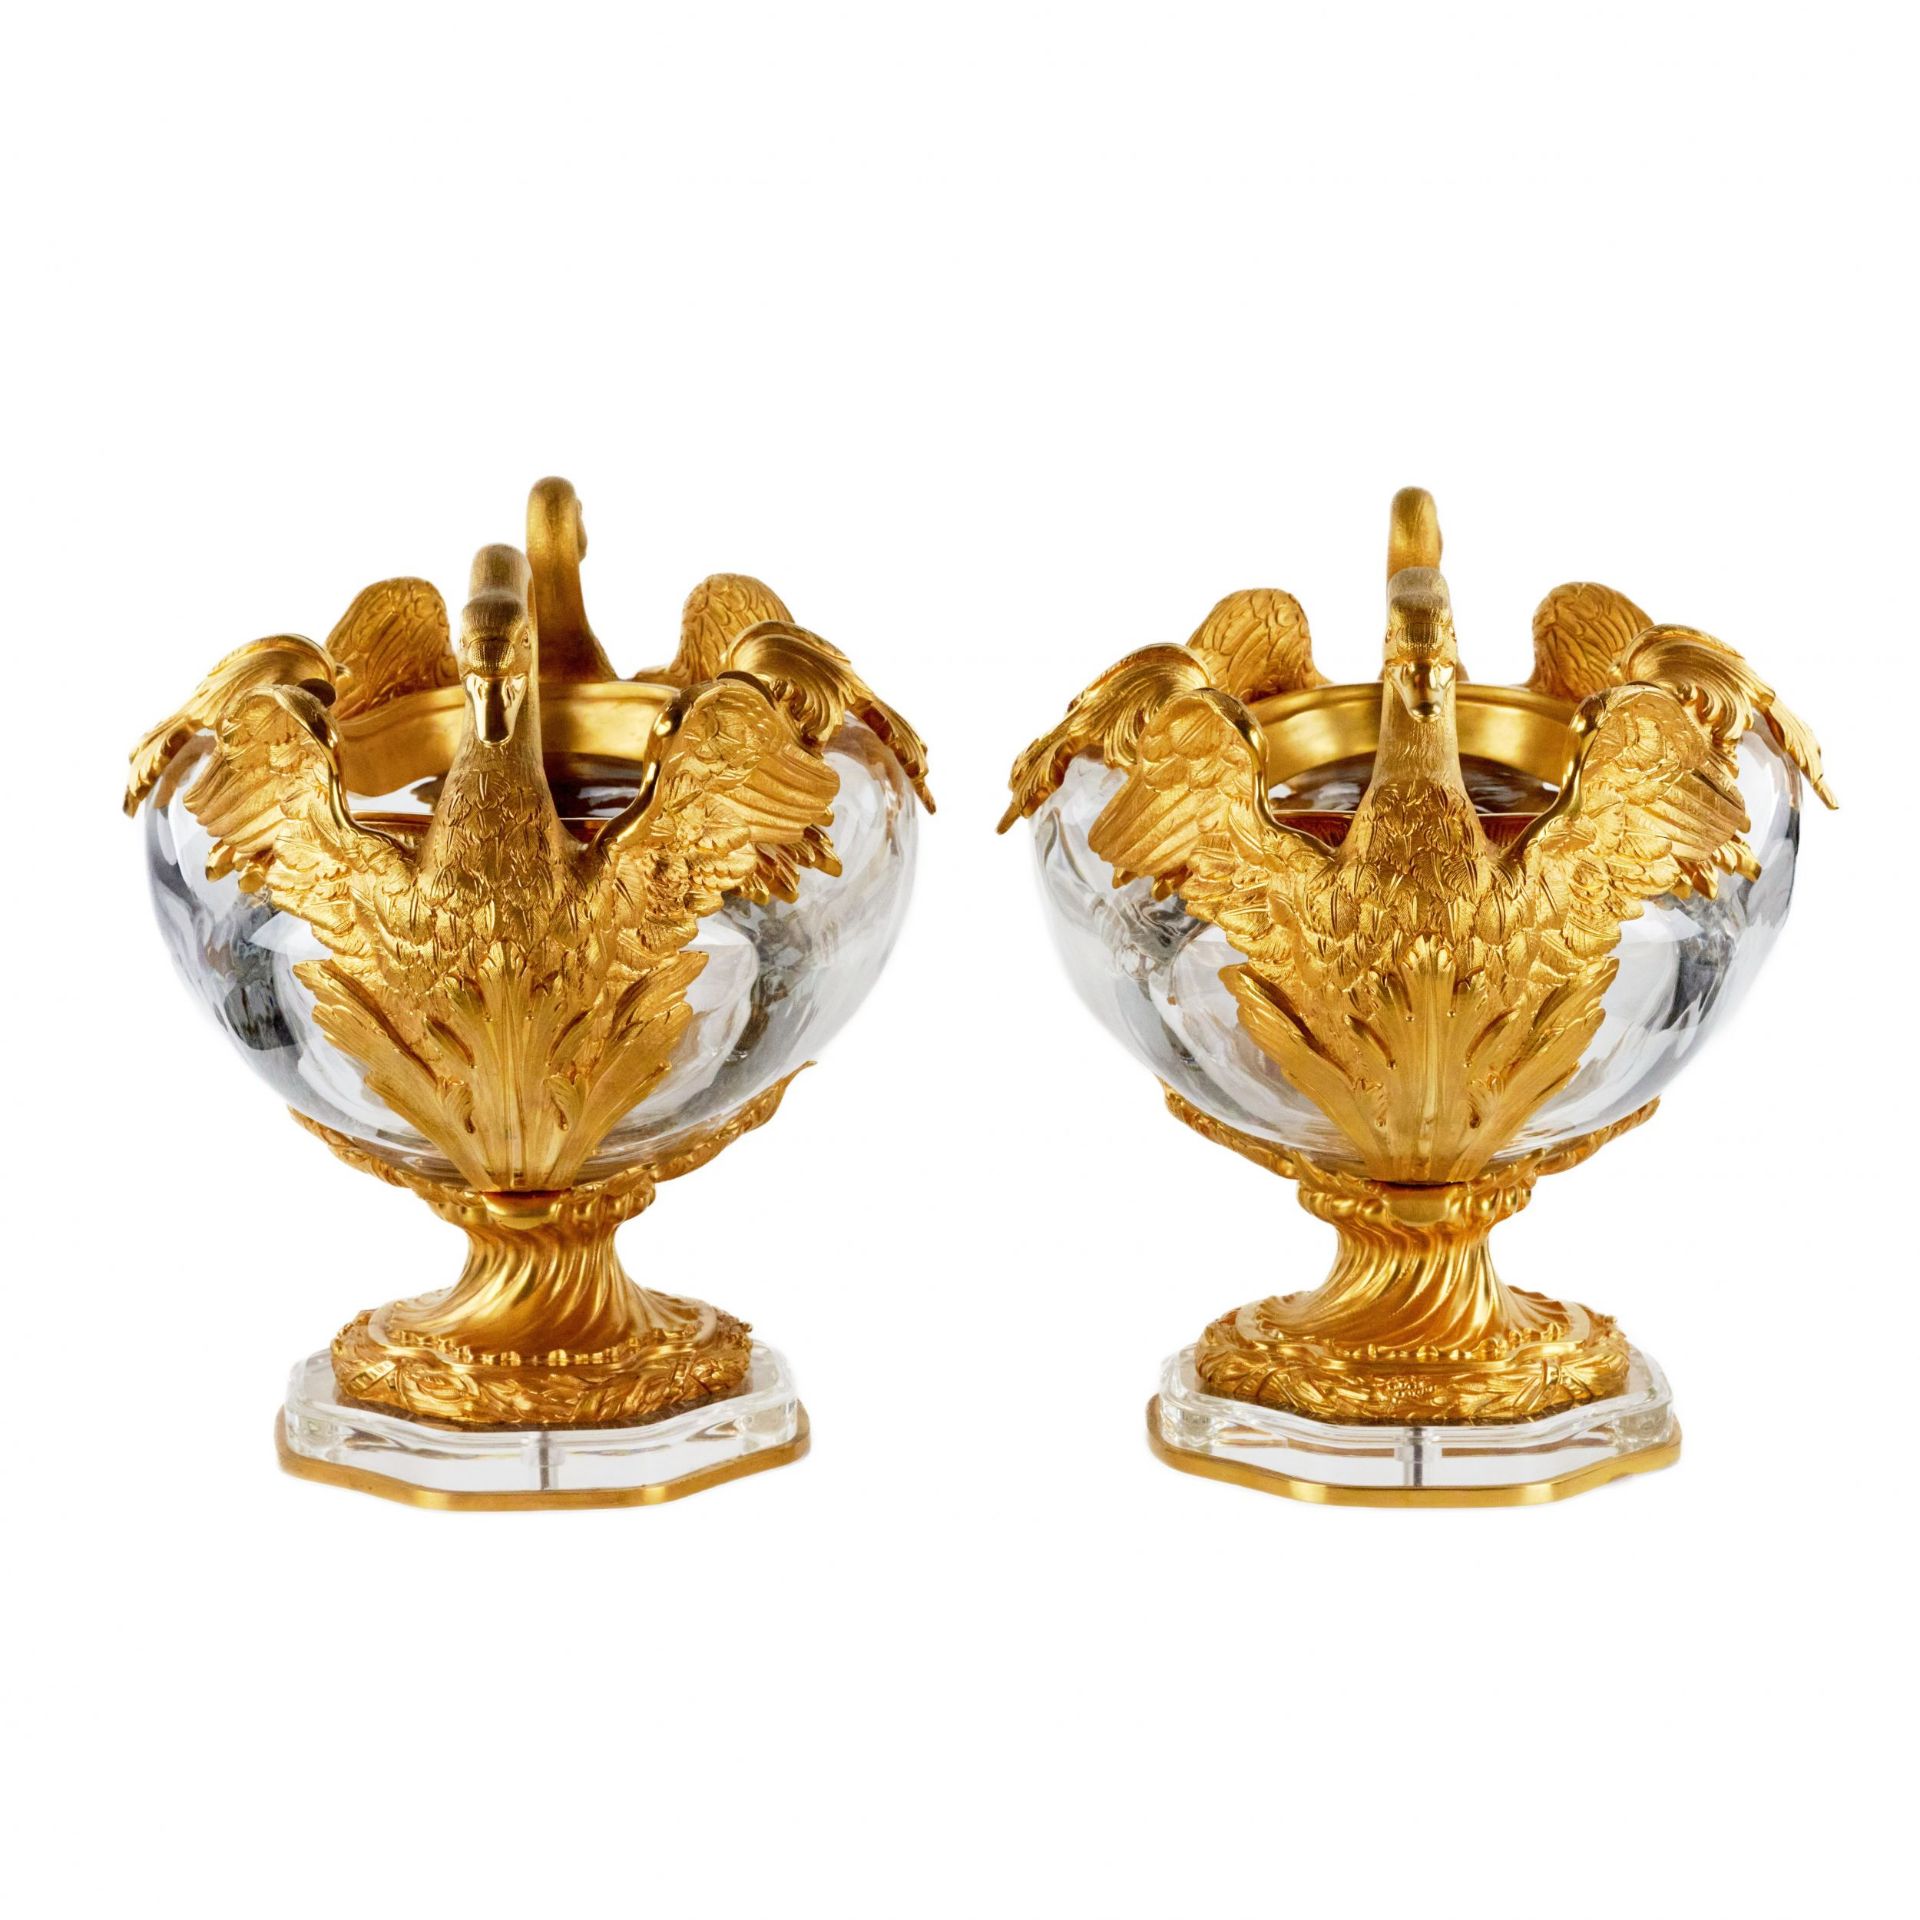 Pair of oval vases in cast glass and gilt bronze, with swan motif. France 20th century. - Image 8 of 8